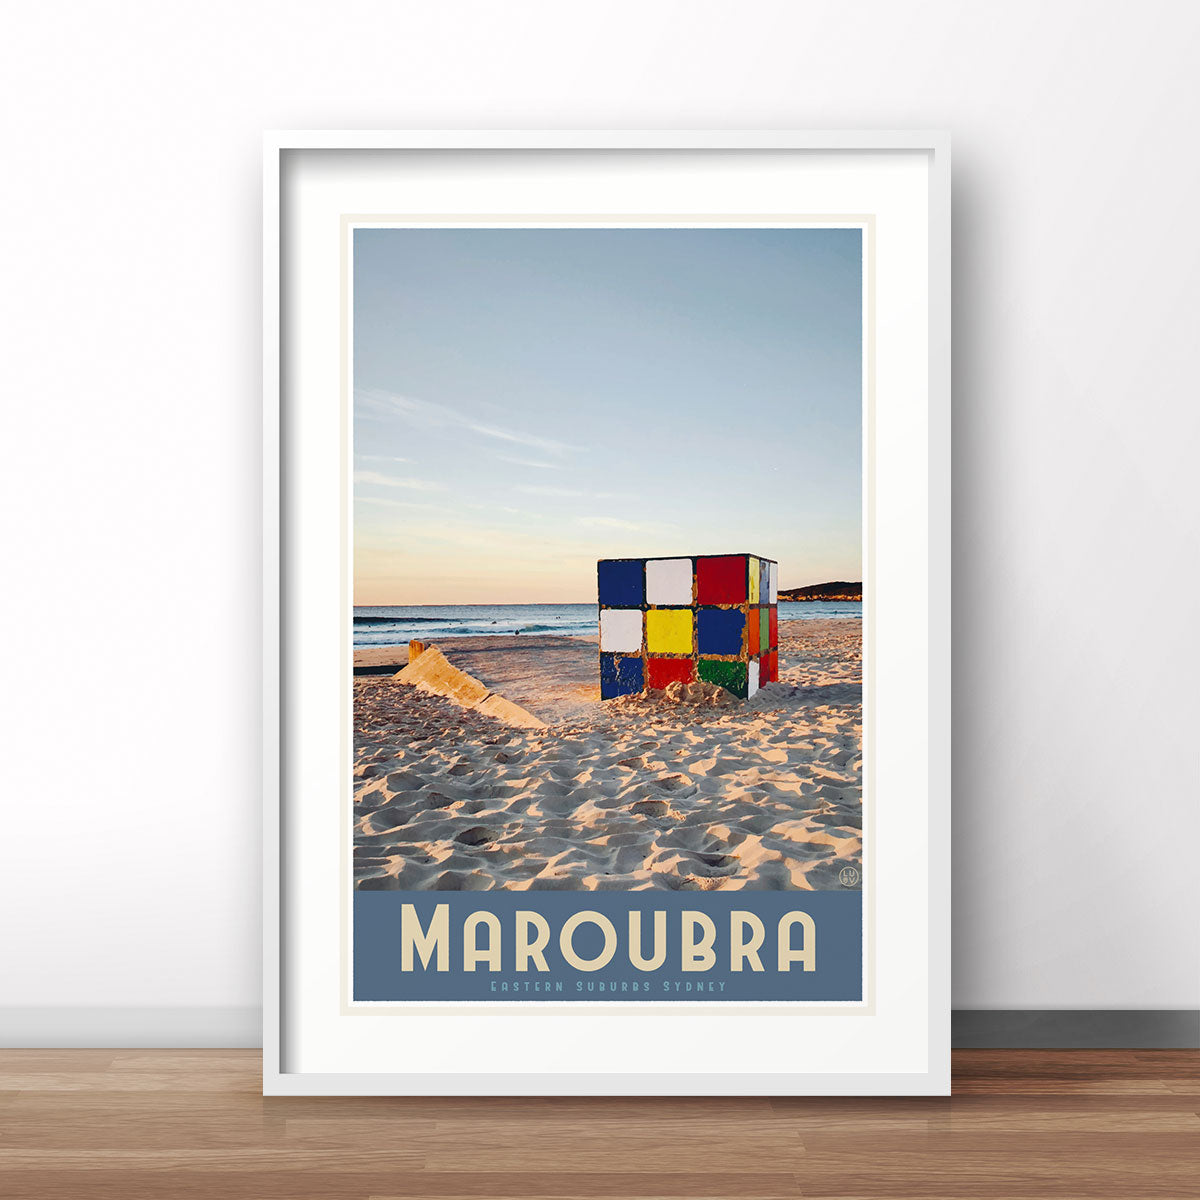 Maroubra cube sydney travel poster by places we luv